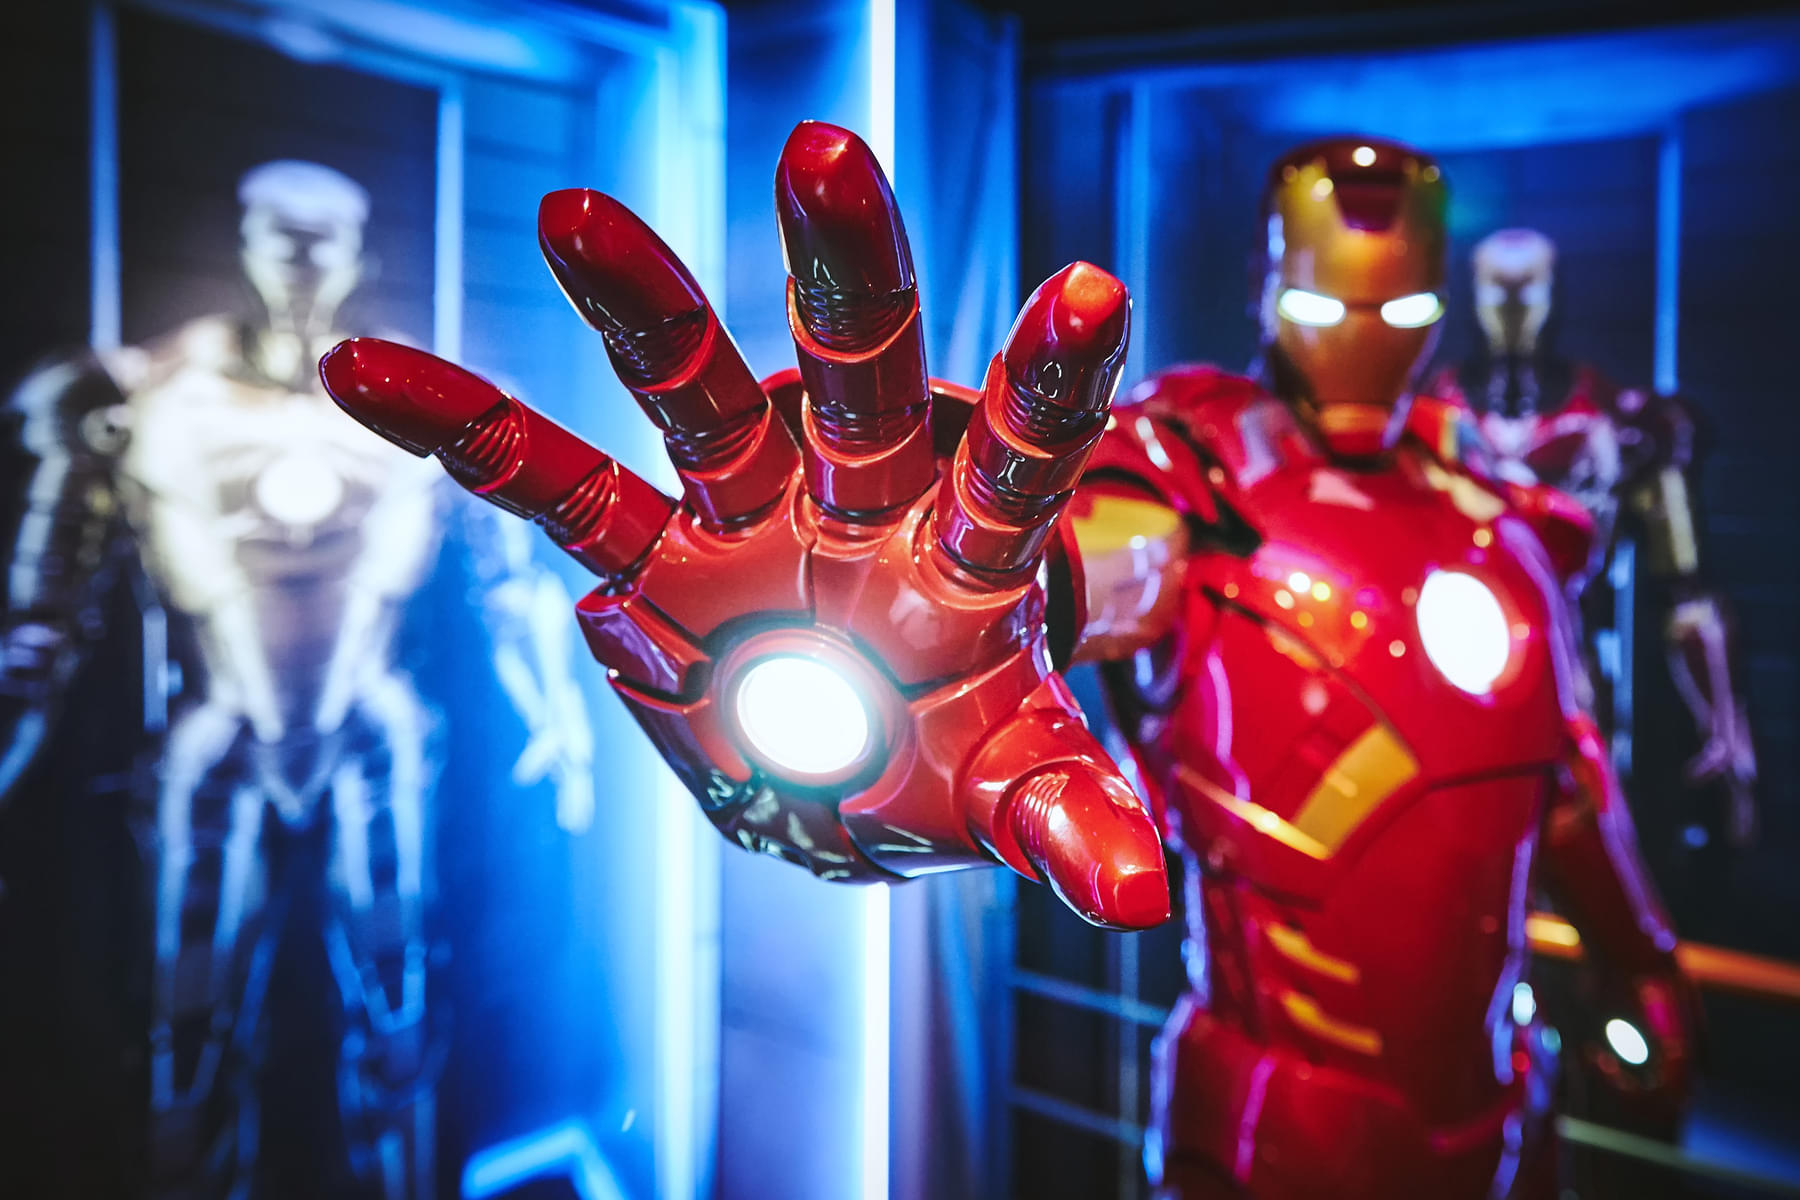 See the amazing replica of the Mark 6 Iron Man suit (up close)